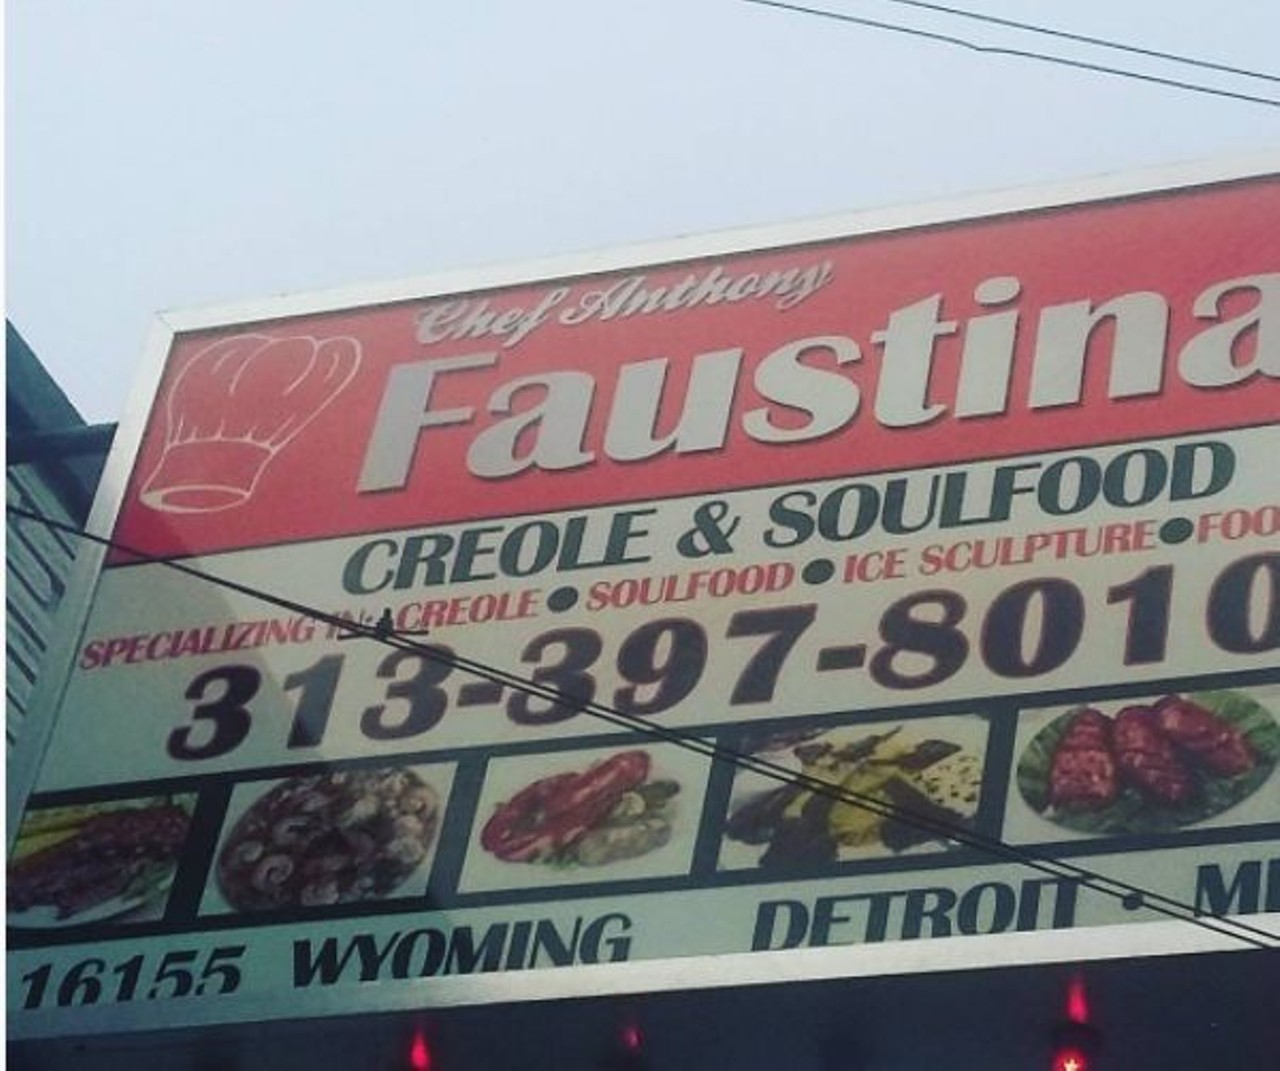 Faustina's Creole & Soulfood
16155 Wyoming Ave., Detroit; 313-397-8010
There's a misconception that "creole" is Louisianian for "salt and cayenne bomb." In reality, "ragin'" isn't common to the Louisiana lexicon and cajun and creole food is complex and full-flavored, rich from properly applied roux, and built layer by layer off a base of the "holy trinity" of aromatics &#151; onion, celery, and bell peppers. For whatever reason, Detroit sees very little of that kind of cooking, but it can be found. The kitchen of chef Anthony Faustina in Faustina's, a small carryout spot on Wyoming Avenue just north of the Lodge, is one of the only places. Photo via IG @blesseddd2020.